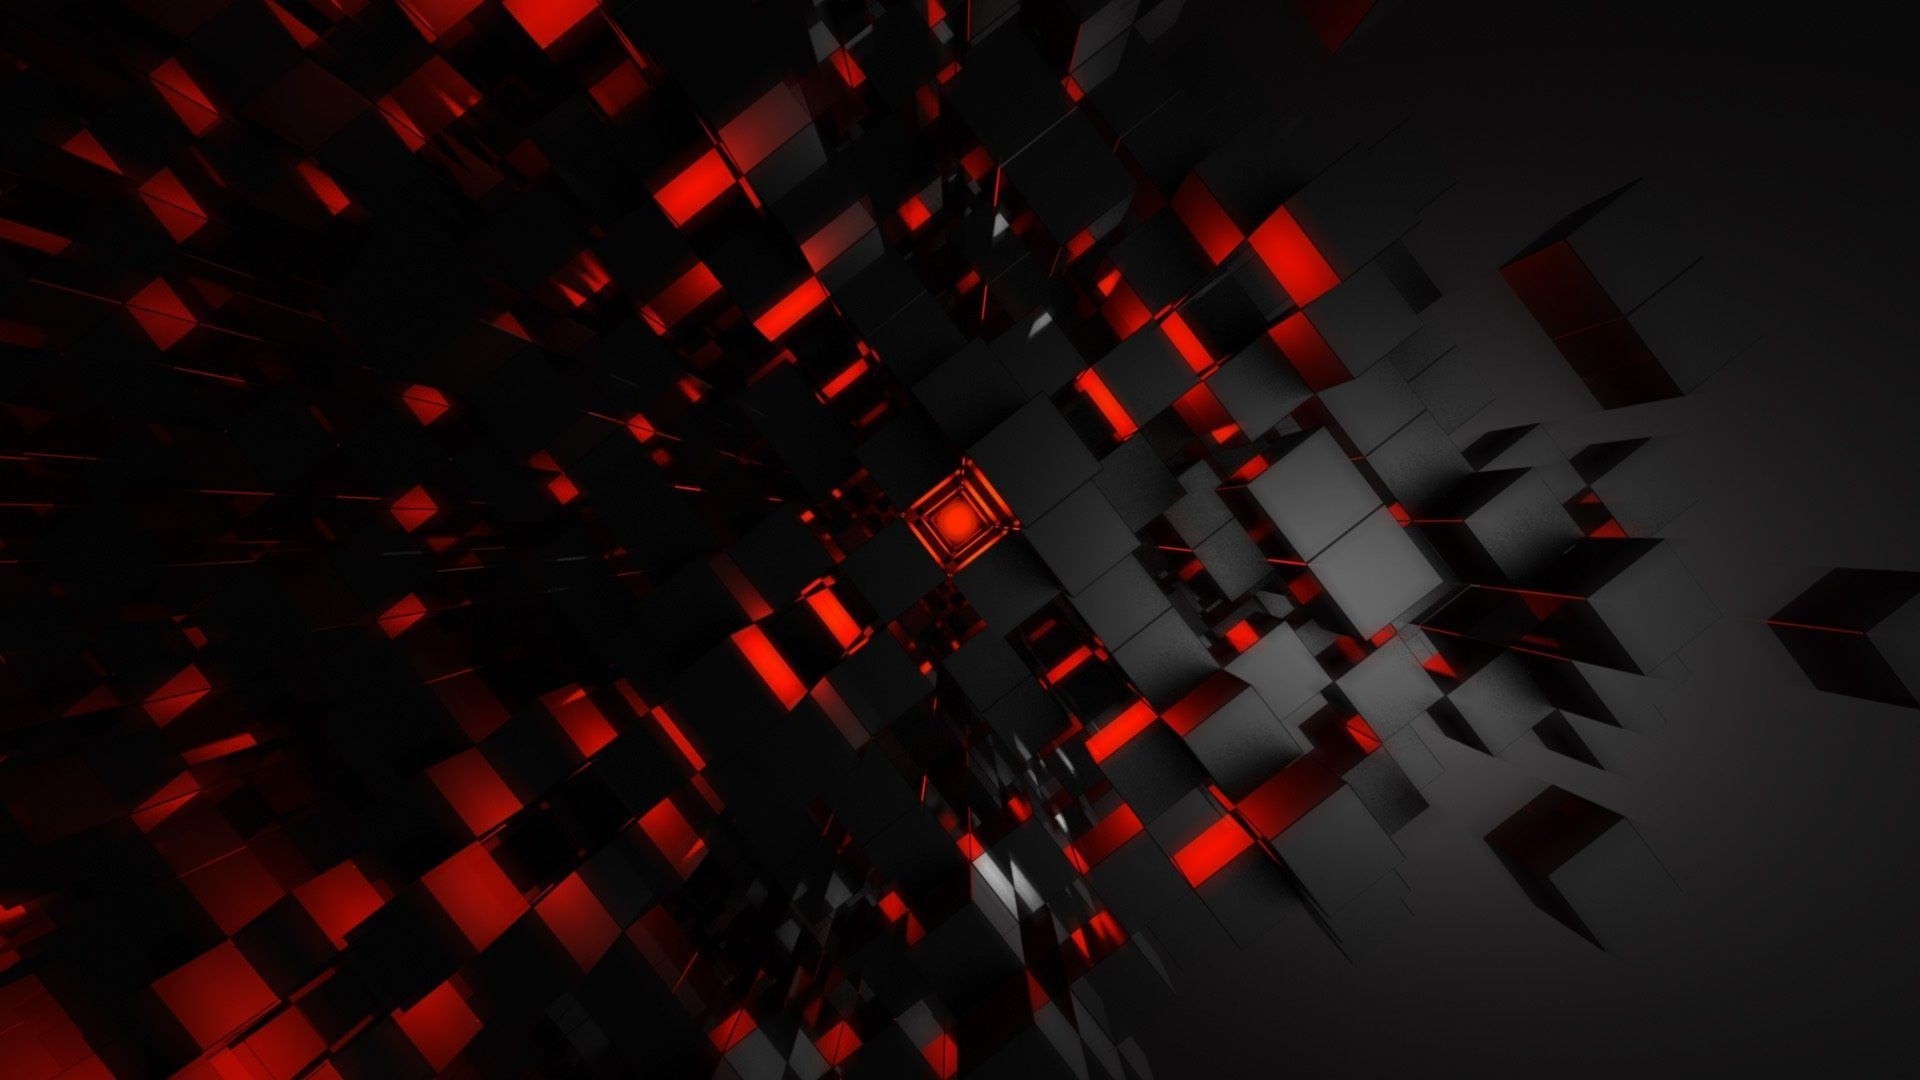 Black And Red Wallpaper 1920x1080